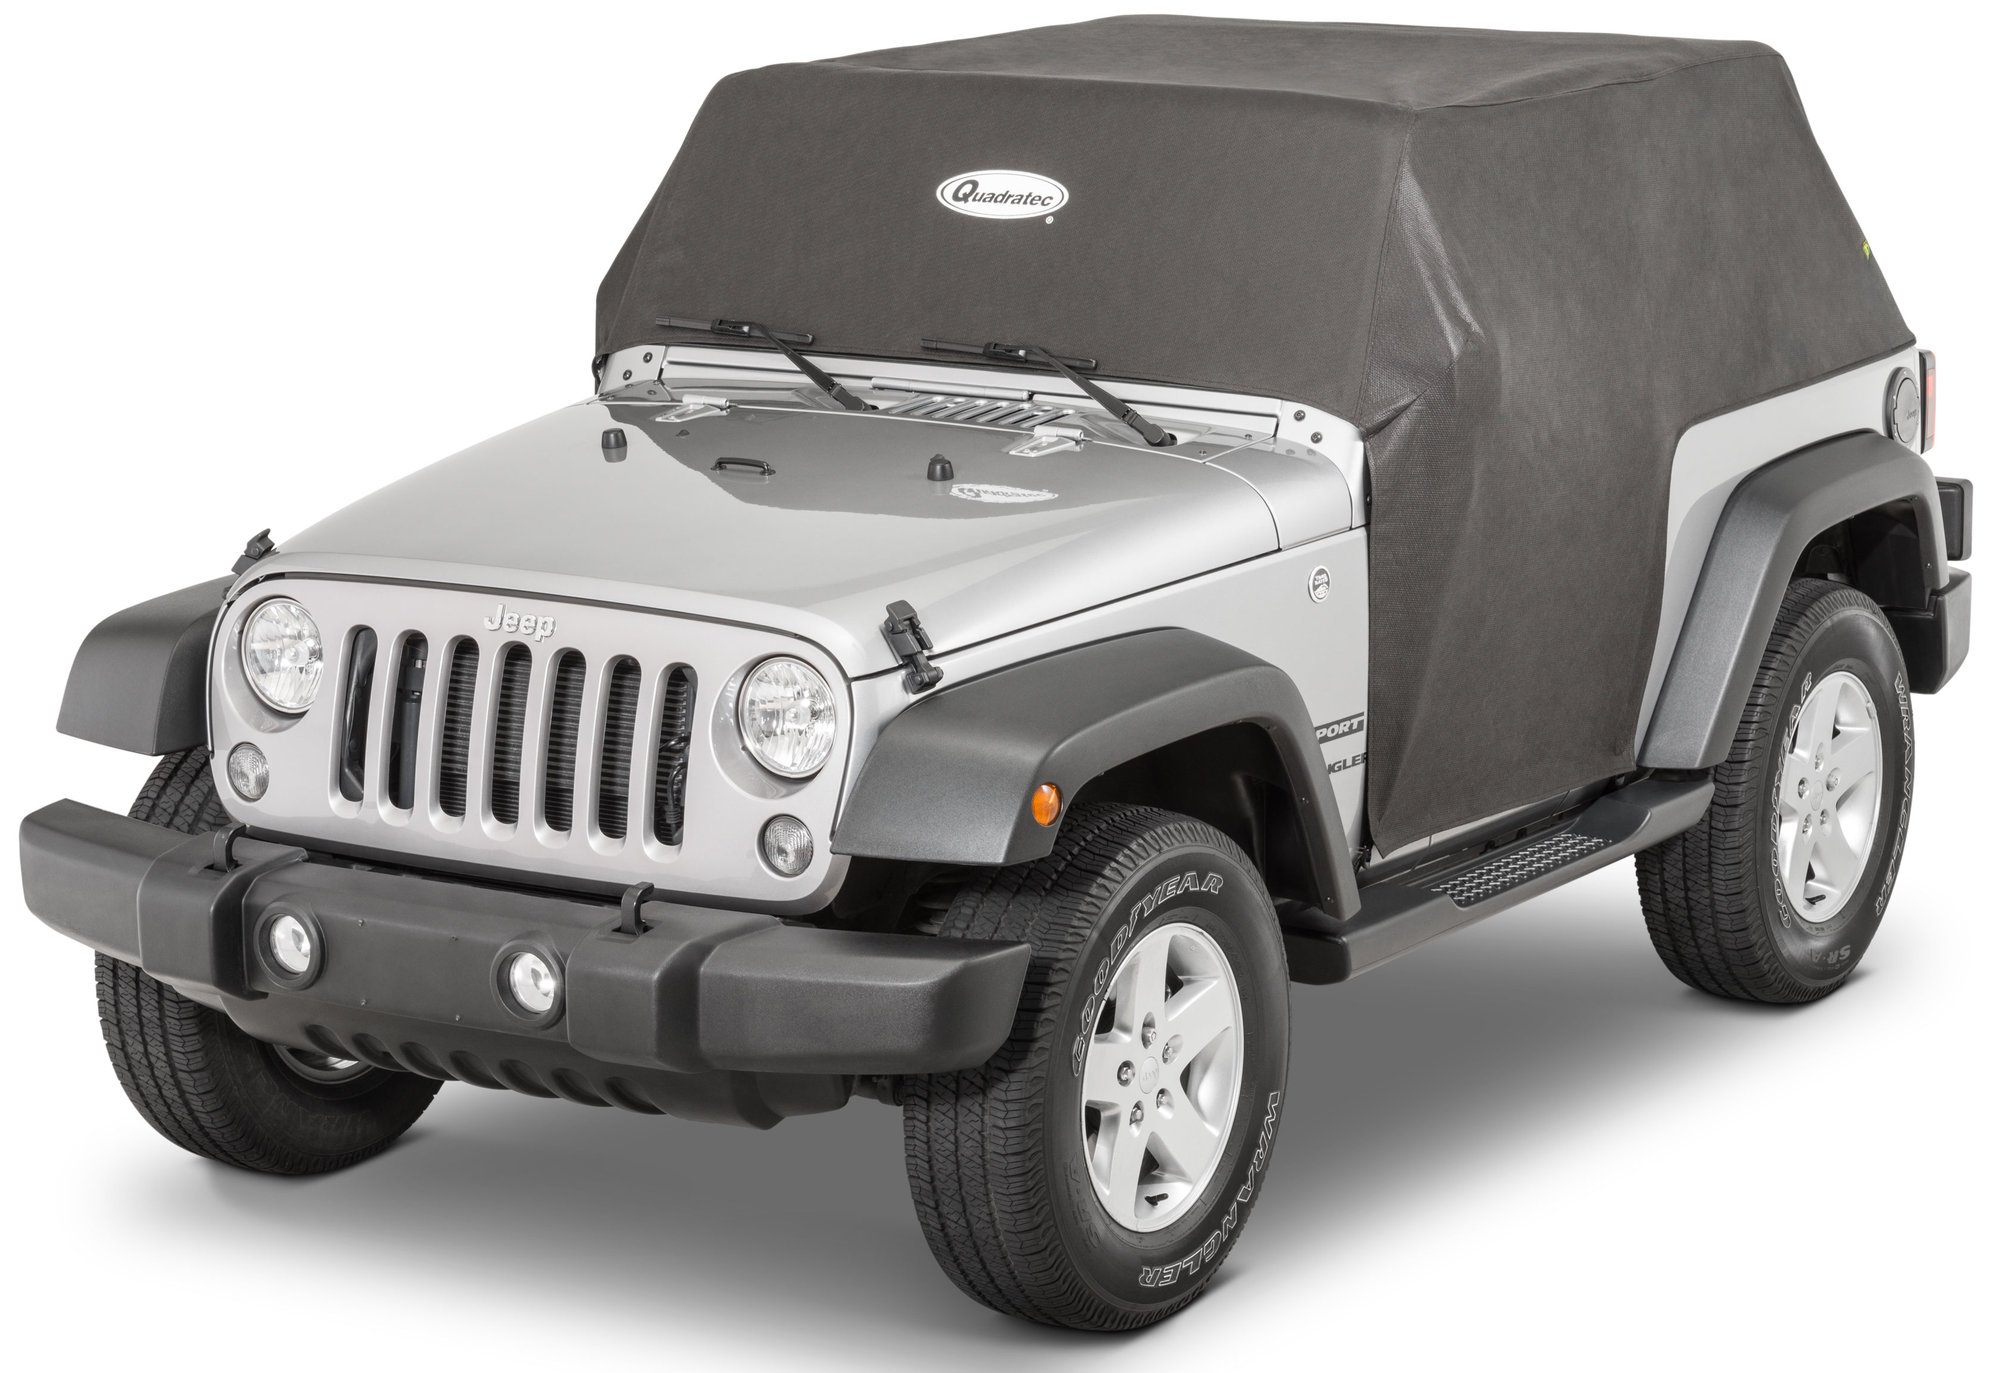 TJ,& JK 2 Door 1987-2017 Windproof Ribbon & Anti-theft Lock KAKIT 5 Layers Jeep Cover for Jeep Wrangler CJ,YJ Waterproof Windproof Dustproof All Weather Prevention Car Cover for Jeep 